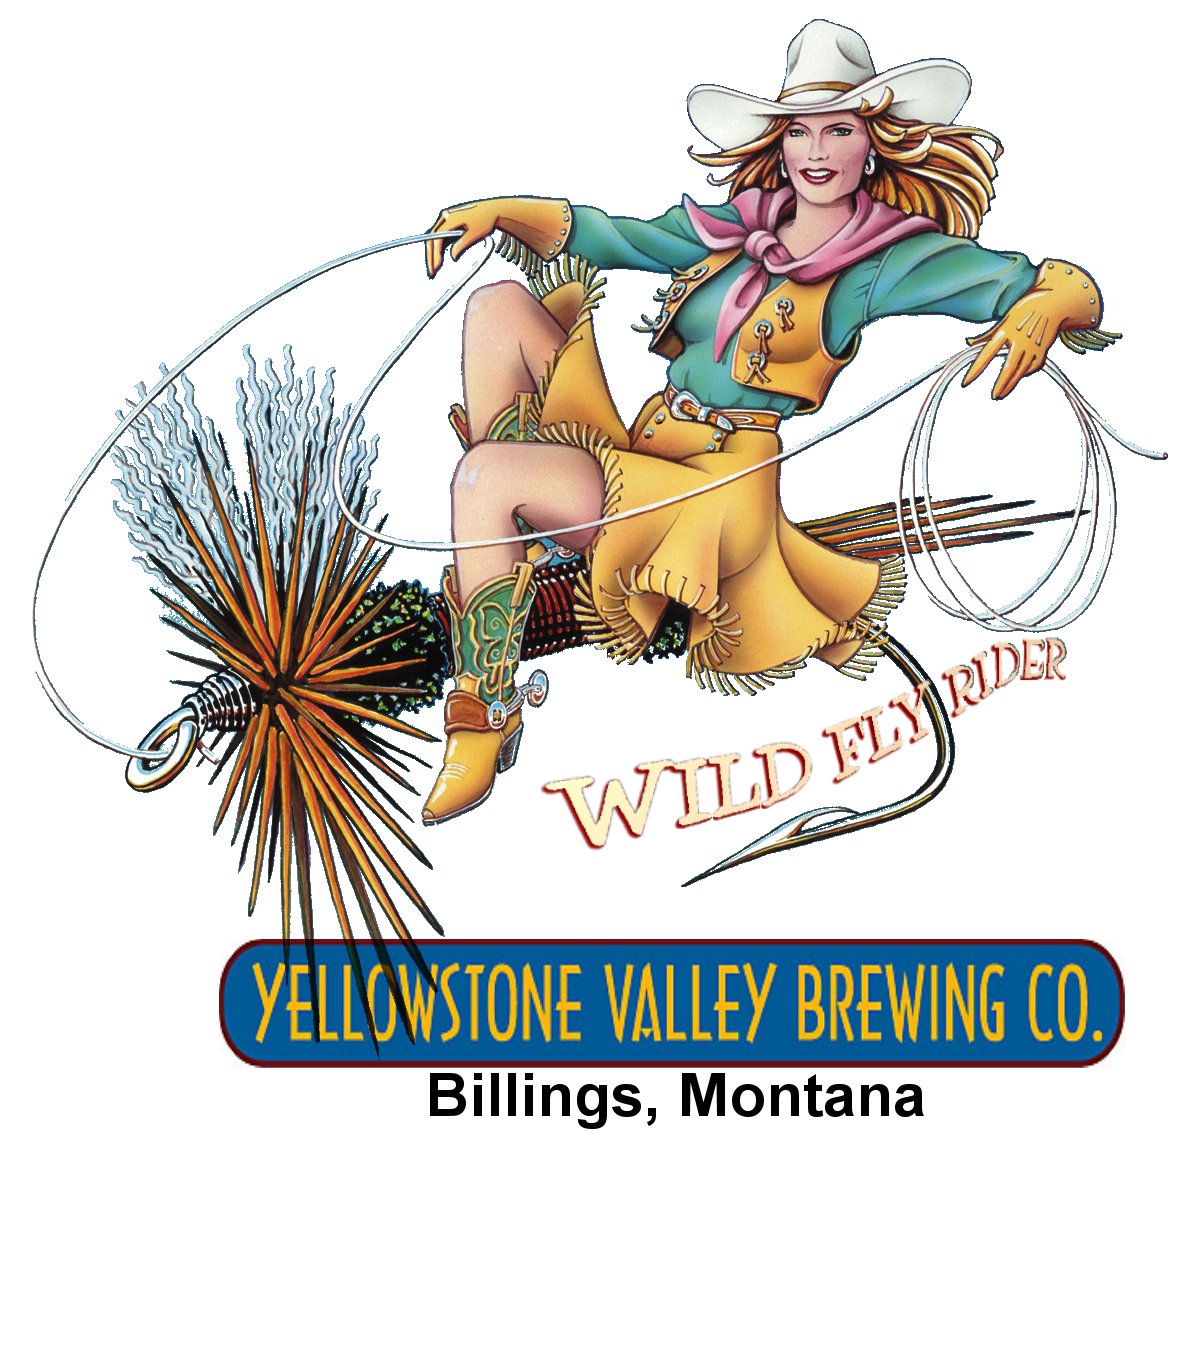 Yellowstone Valley Brewing Co jobs